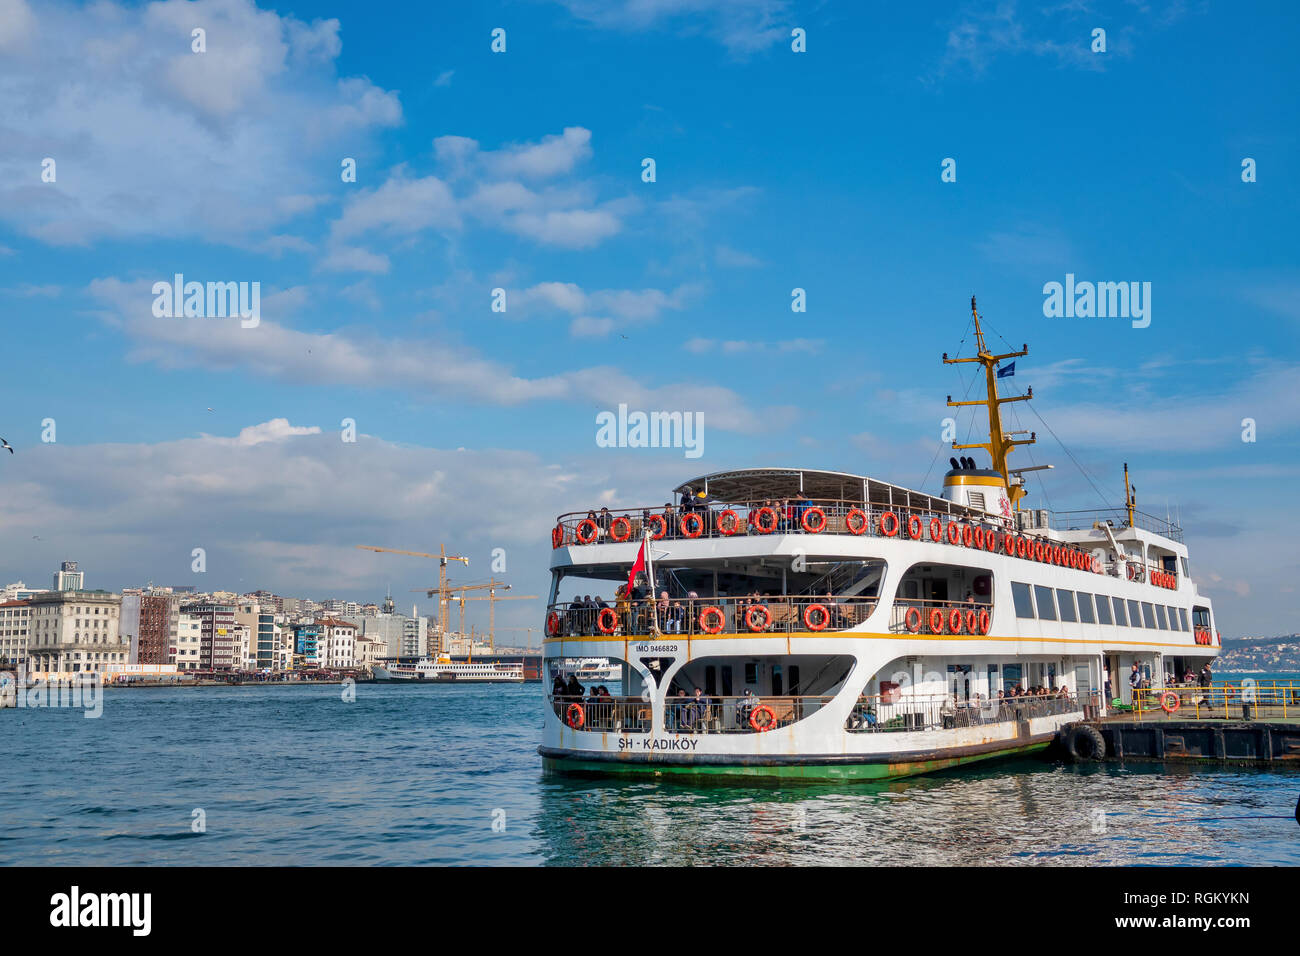 Sightseeing Boat in the Golden Horn, Istanbul, Turkey Stock Photo